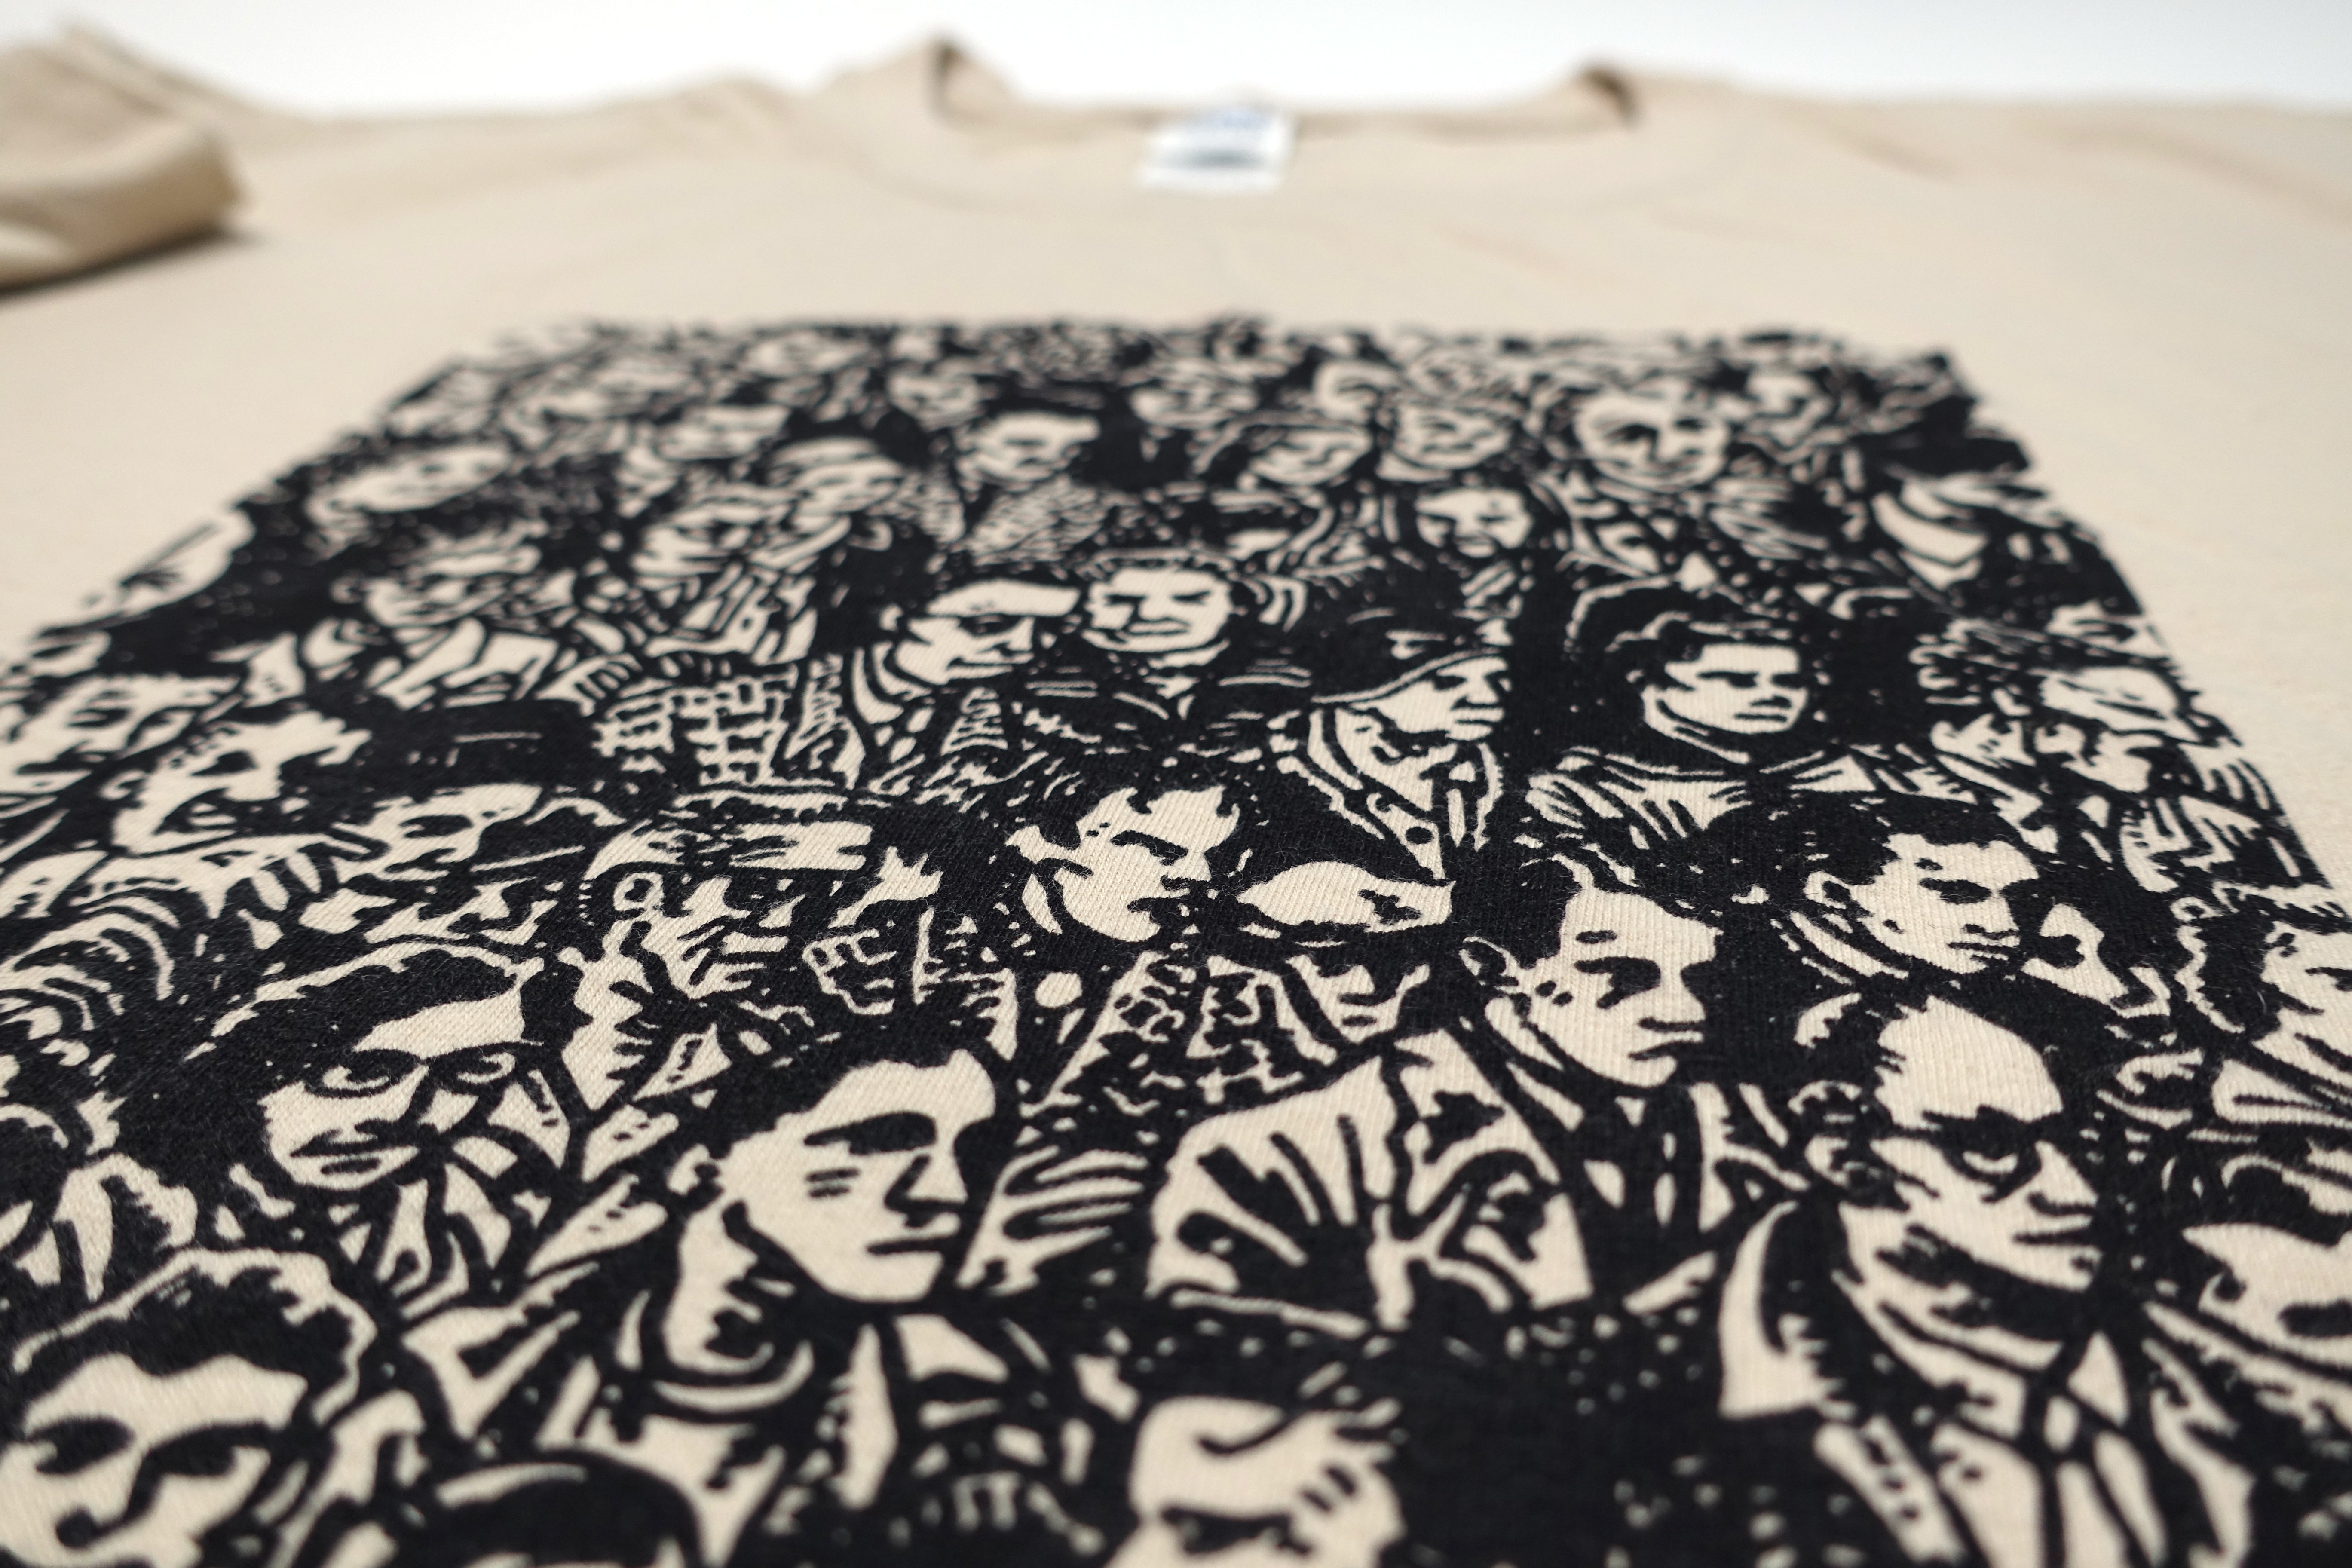 Protomartyr – The Agent Intellect Crowd Scene 2015 Tour Shirt Size XL